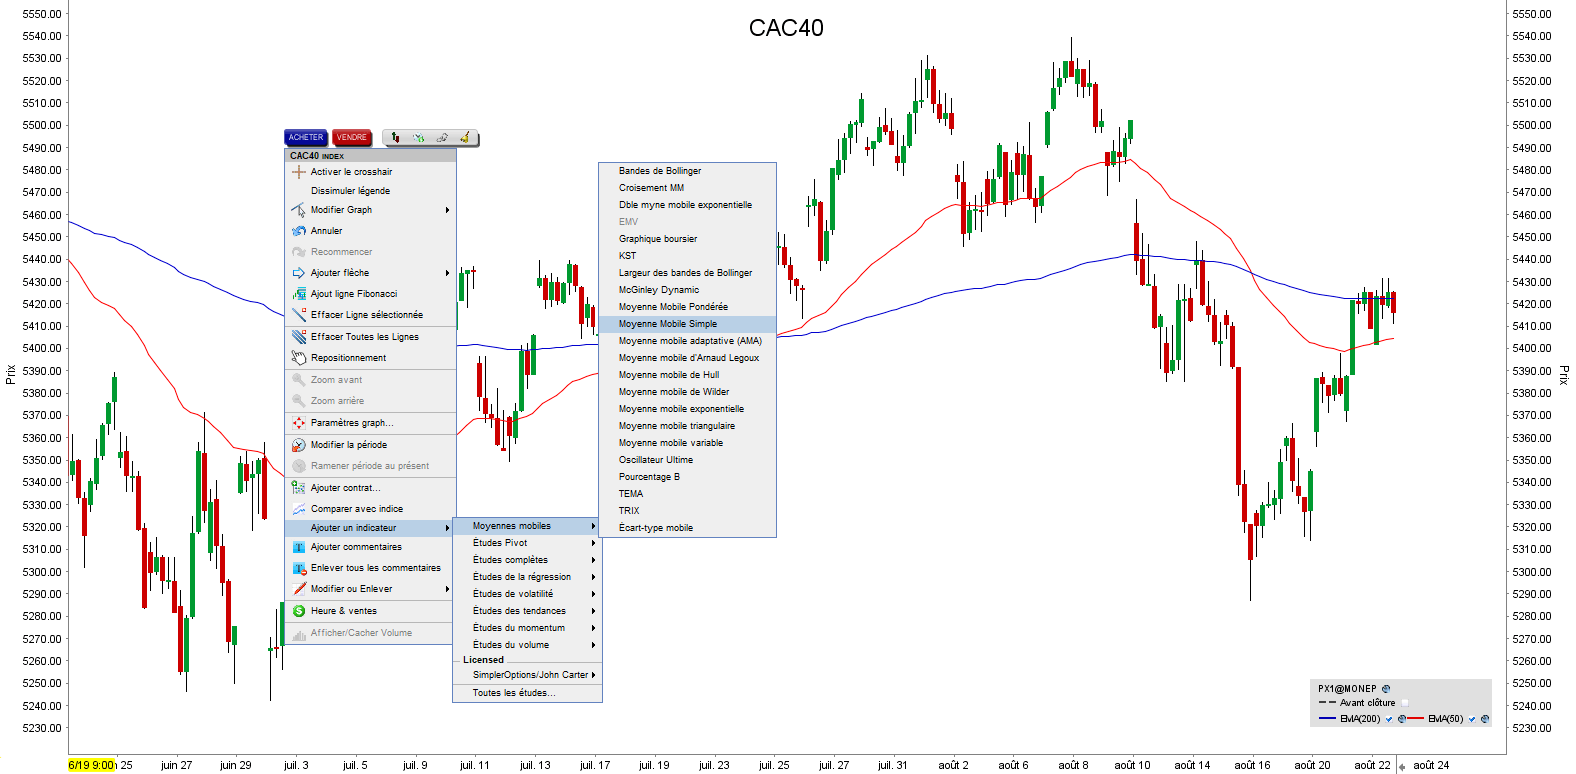 CAC40 in LYNX Trading Platform - Les indicateur Moving Average - moyenne mobile 